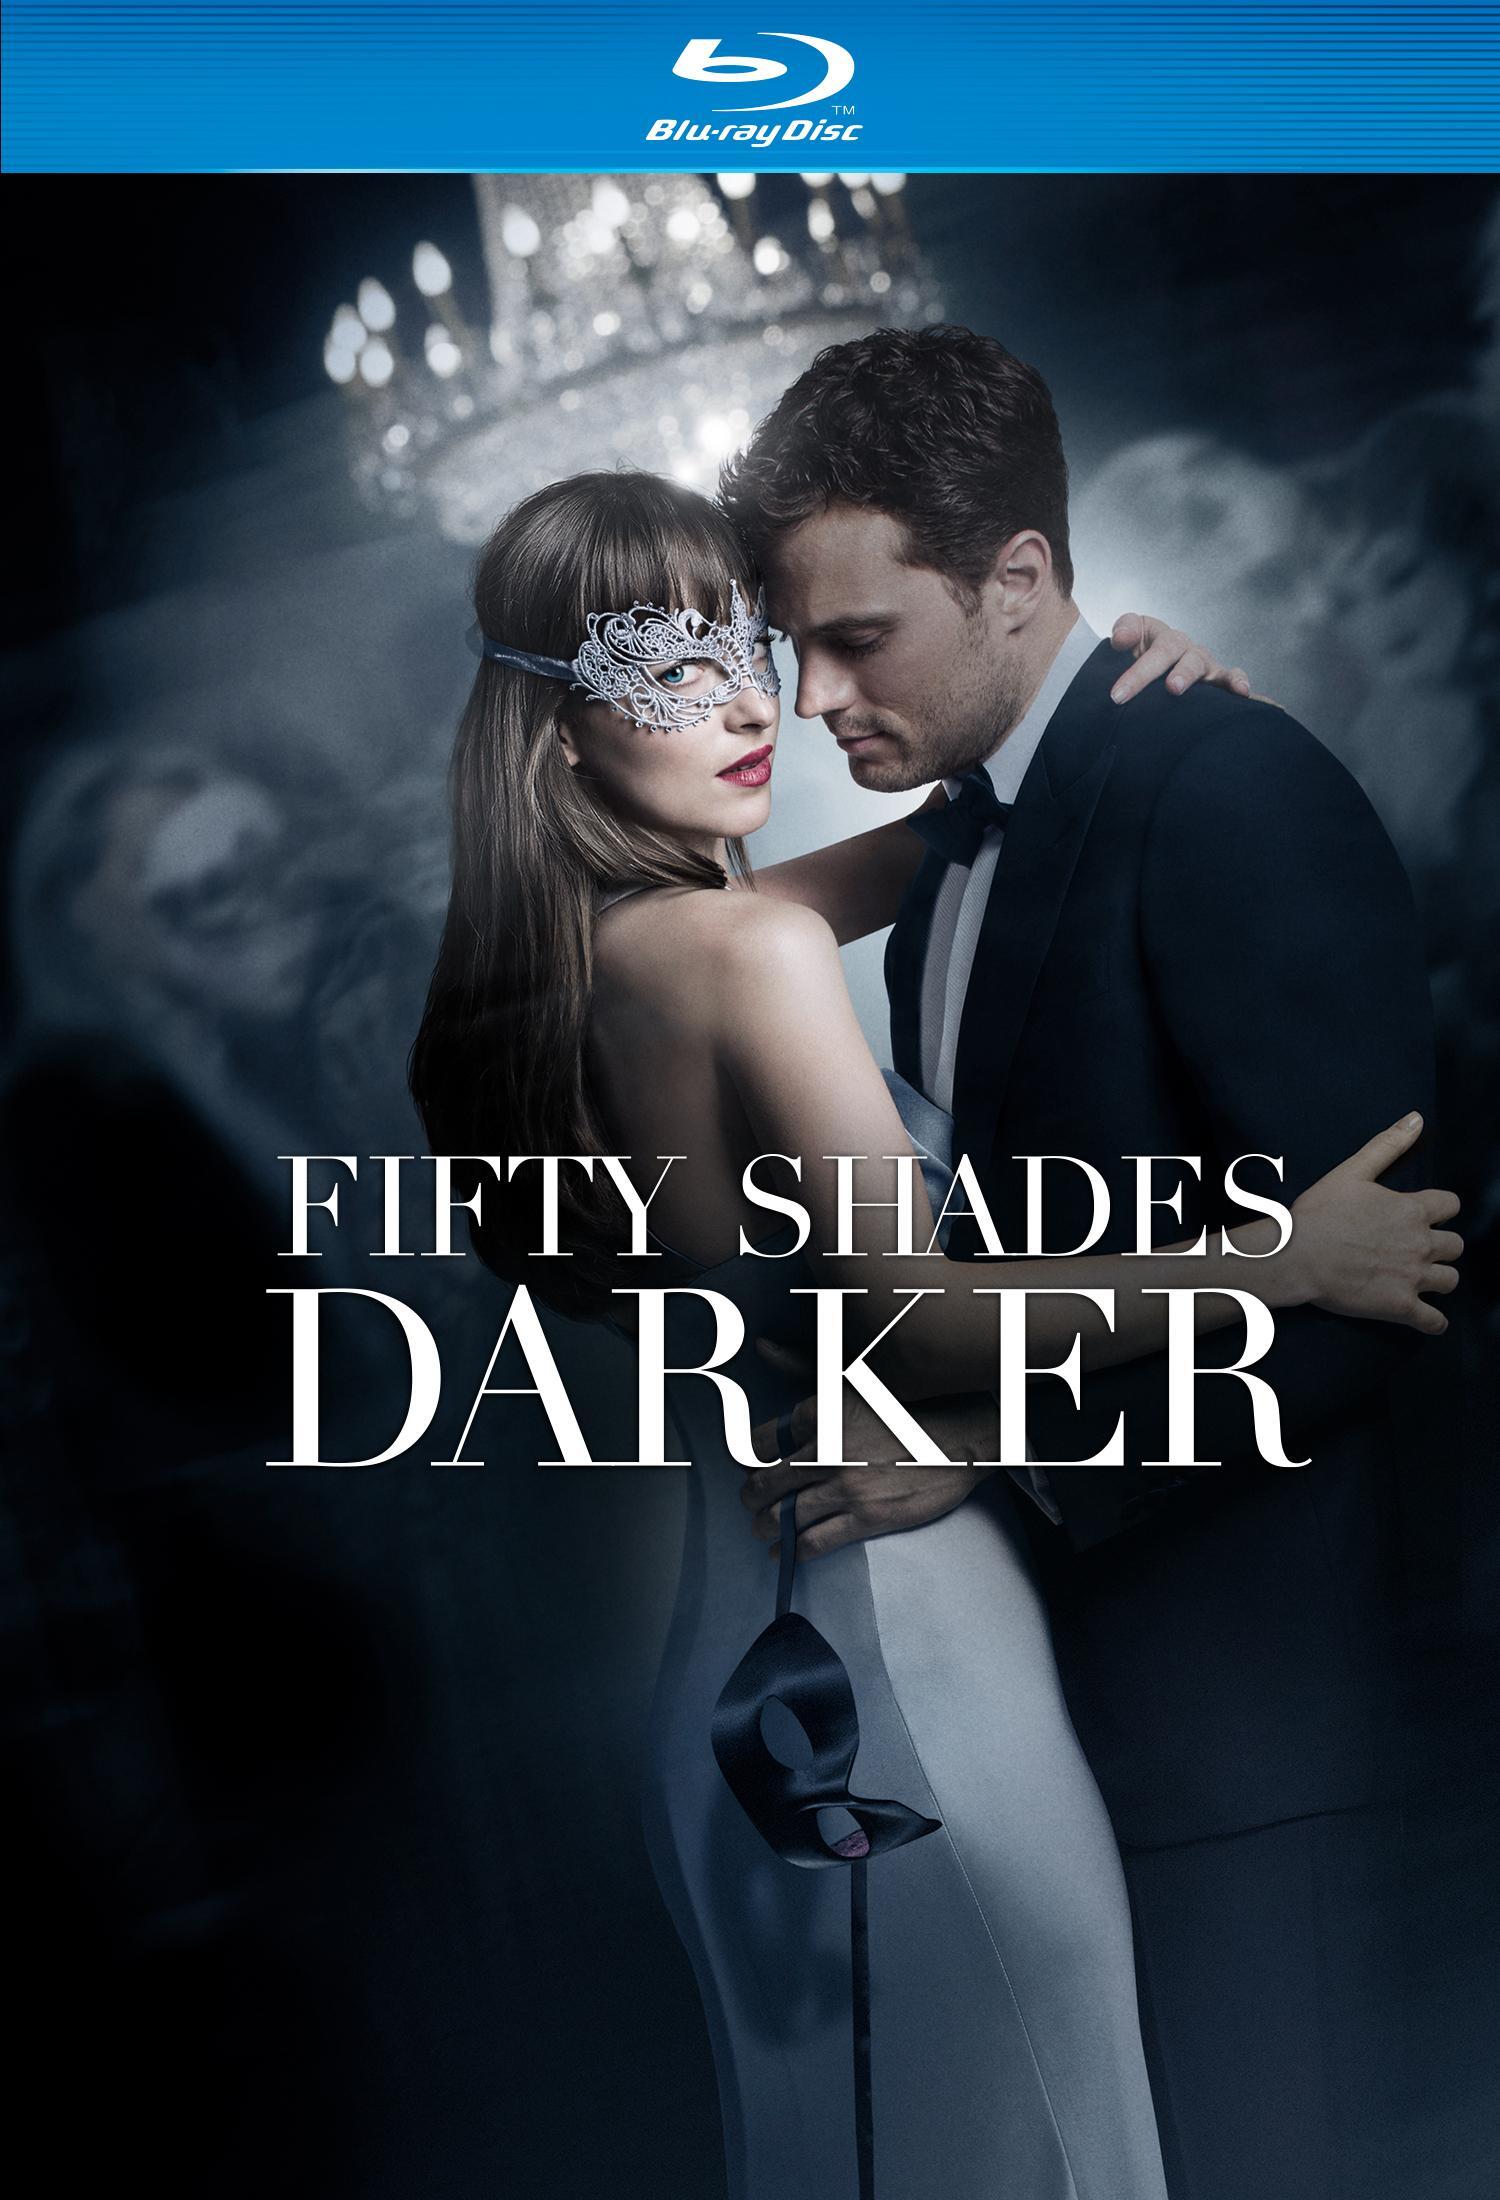 Fifty Shades Darker (Unrated Edition DVD) - Blu-ray [ 2017 ]  - Drama Movies On Blu-ray - Movies On GRUV